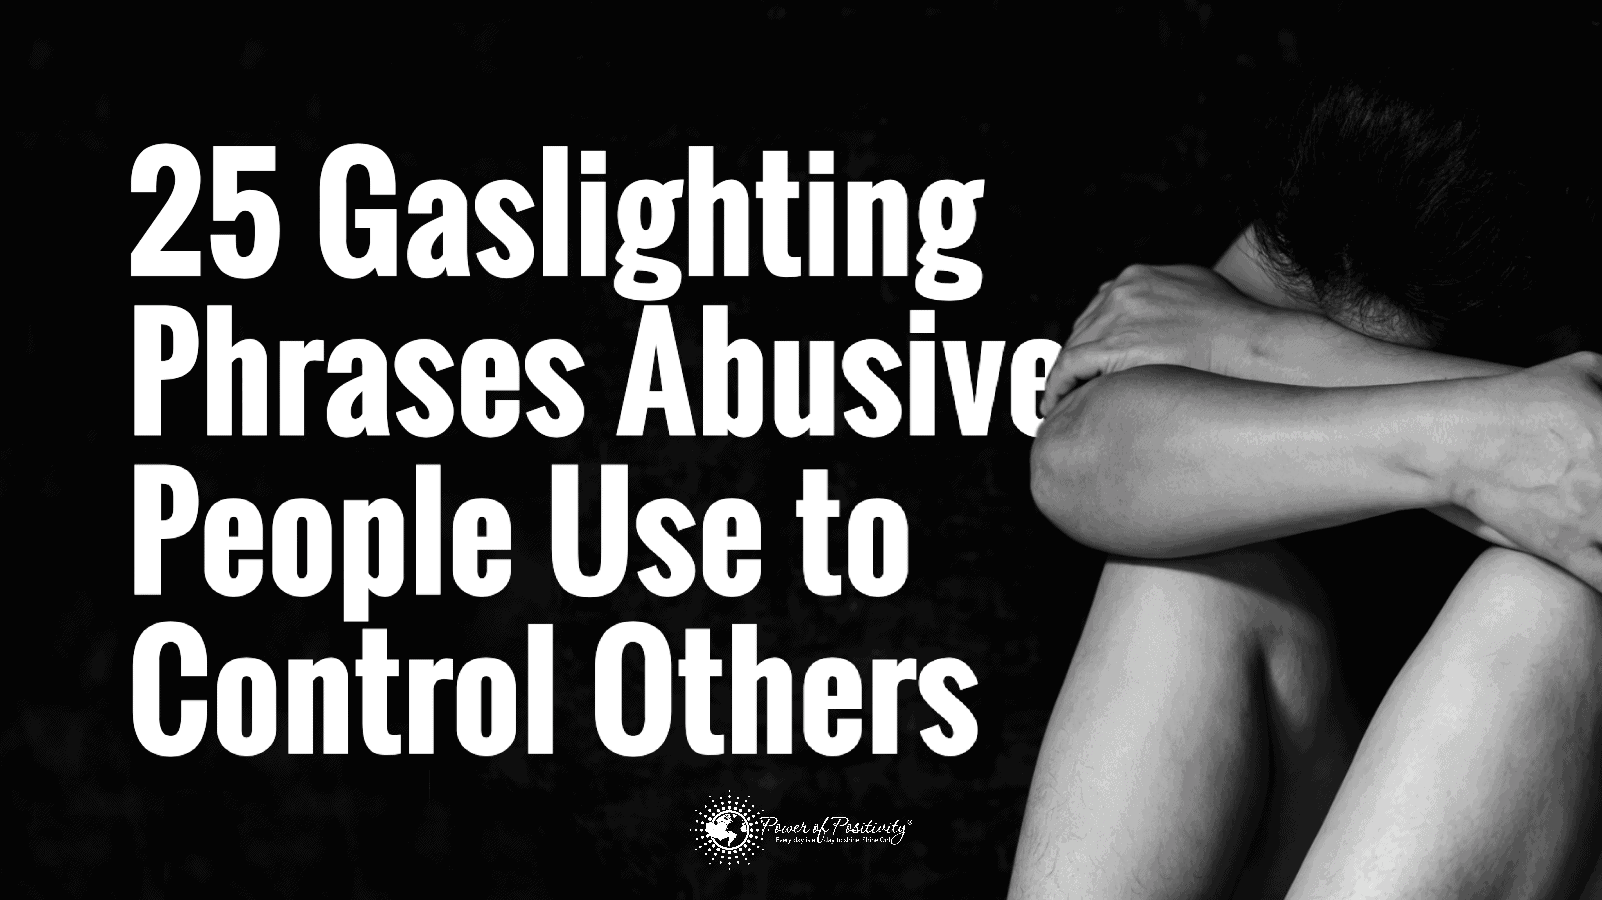 25 Gaslighting Phrases Abusive People Use to Control Others